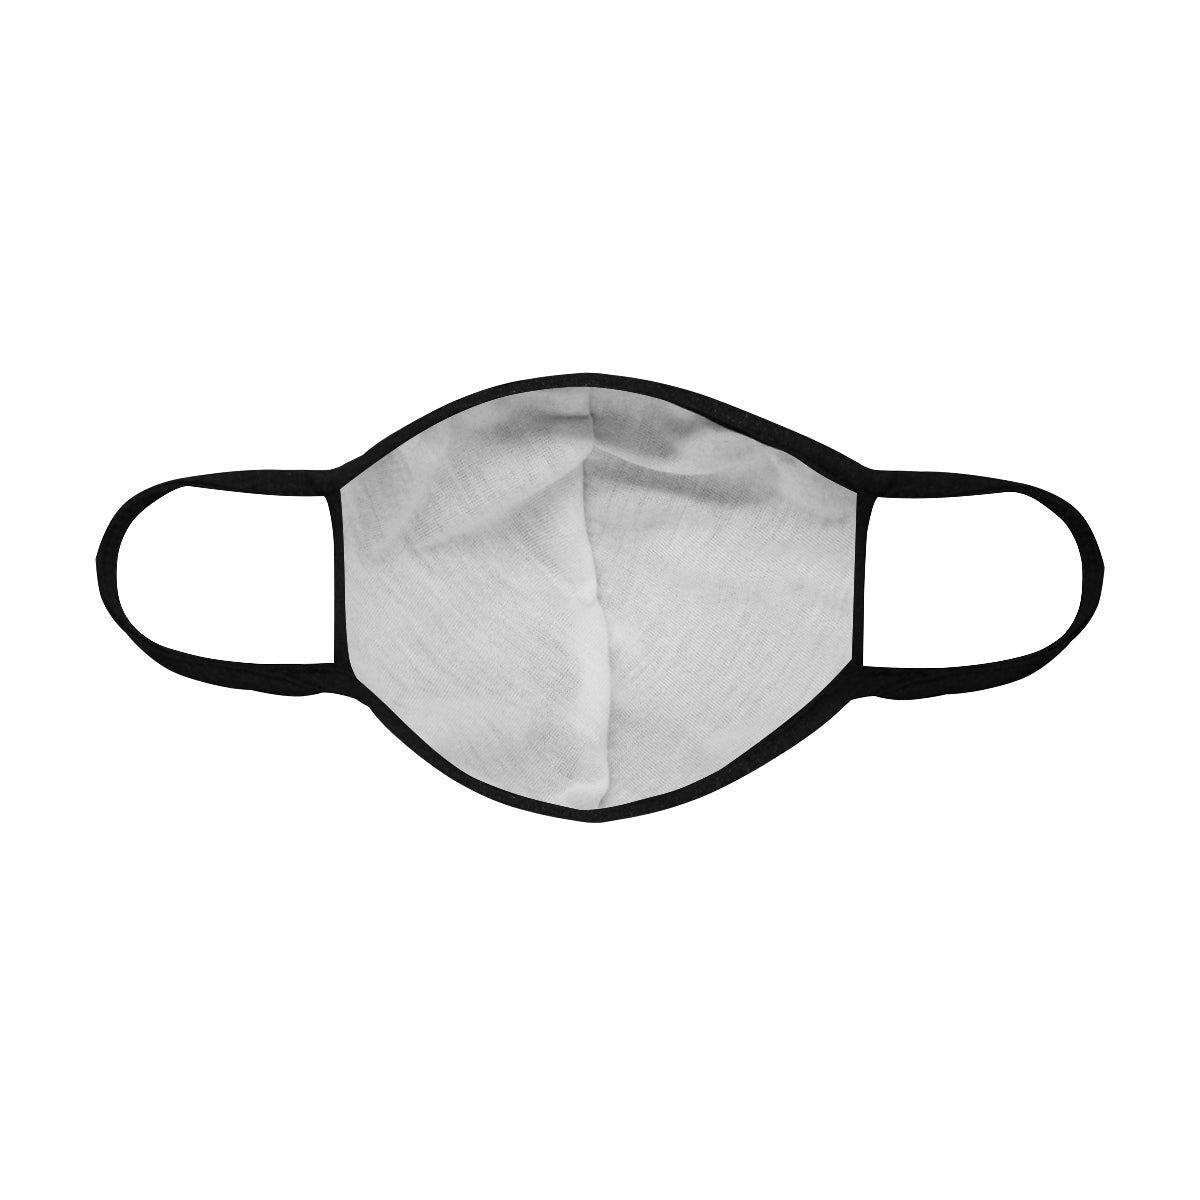 Scribble Art Cotton Fabric Face Mask with filter slots (30 Filters Included) - Non-medical use